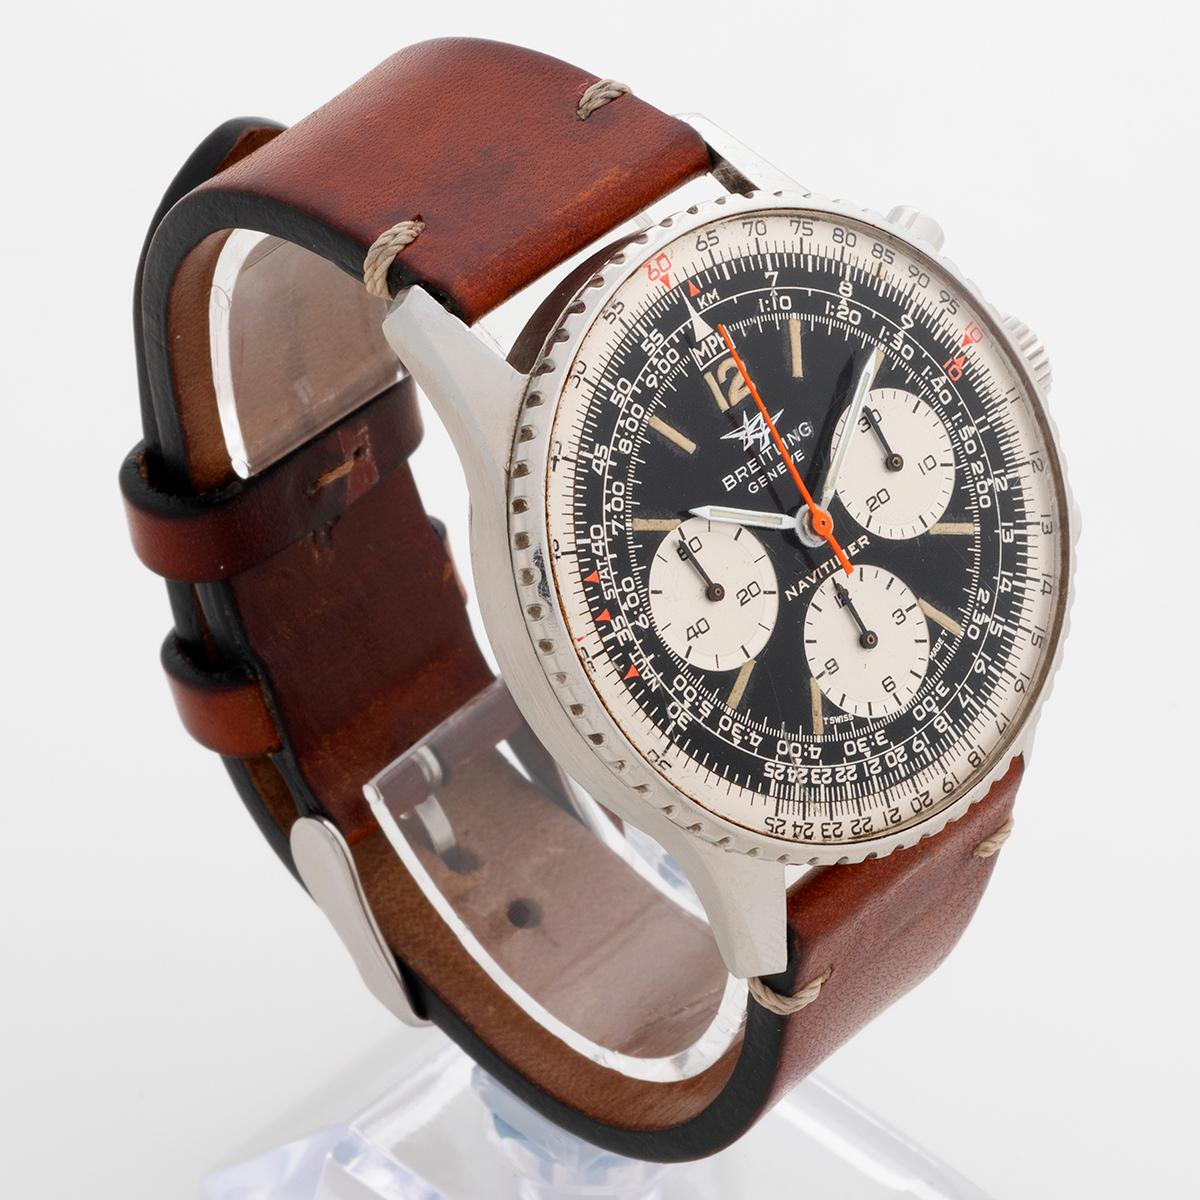 Our vintage Breitling Navitimer reference 806 features a 41mm stainless steel case and a manually wound Venus 178 movement. An early Navitimer, this example has a wonderfully dial and bezel insert, the twin planes dial has coeval tritium indices and